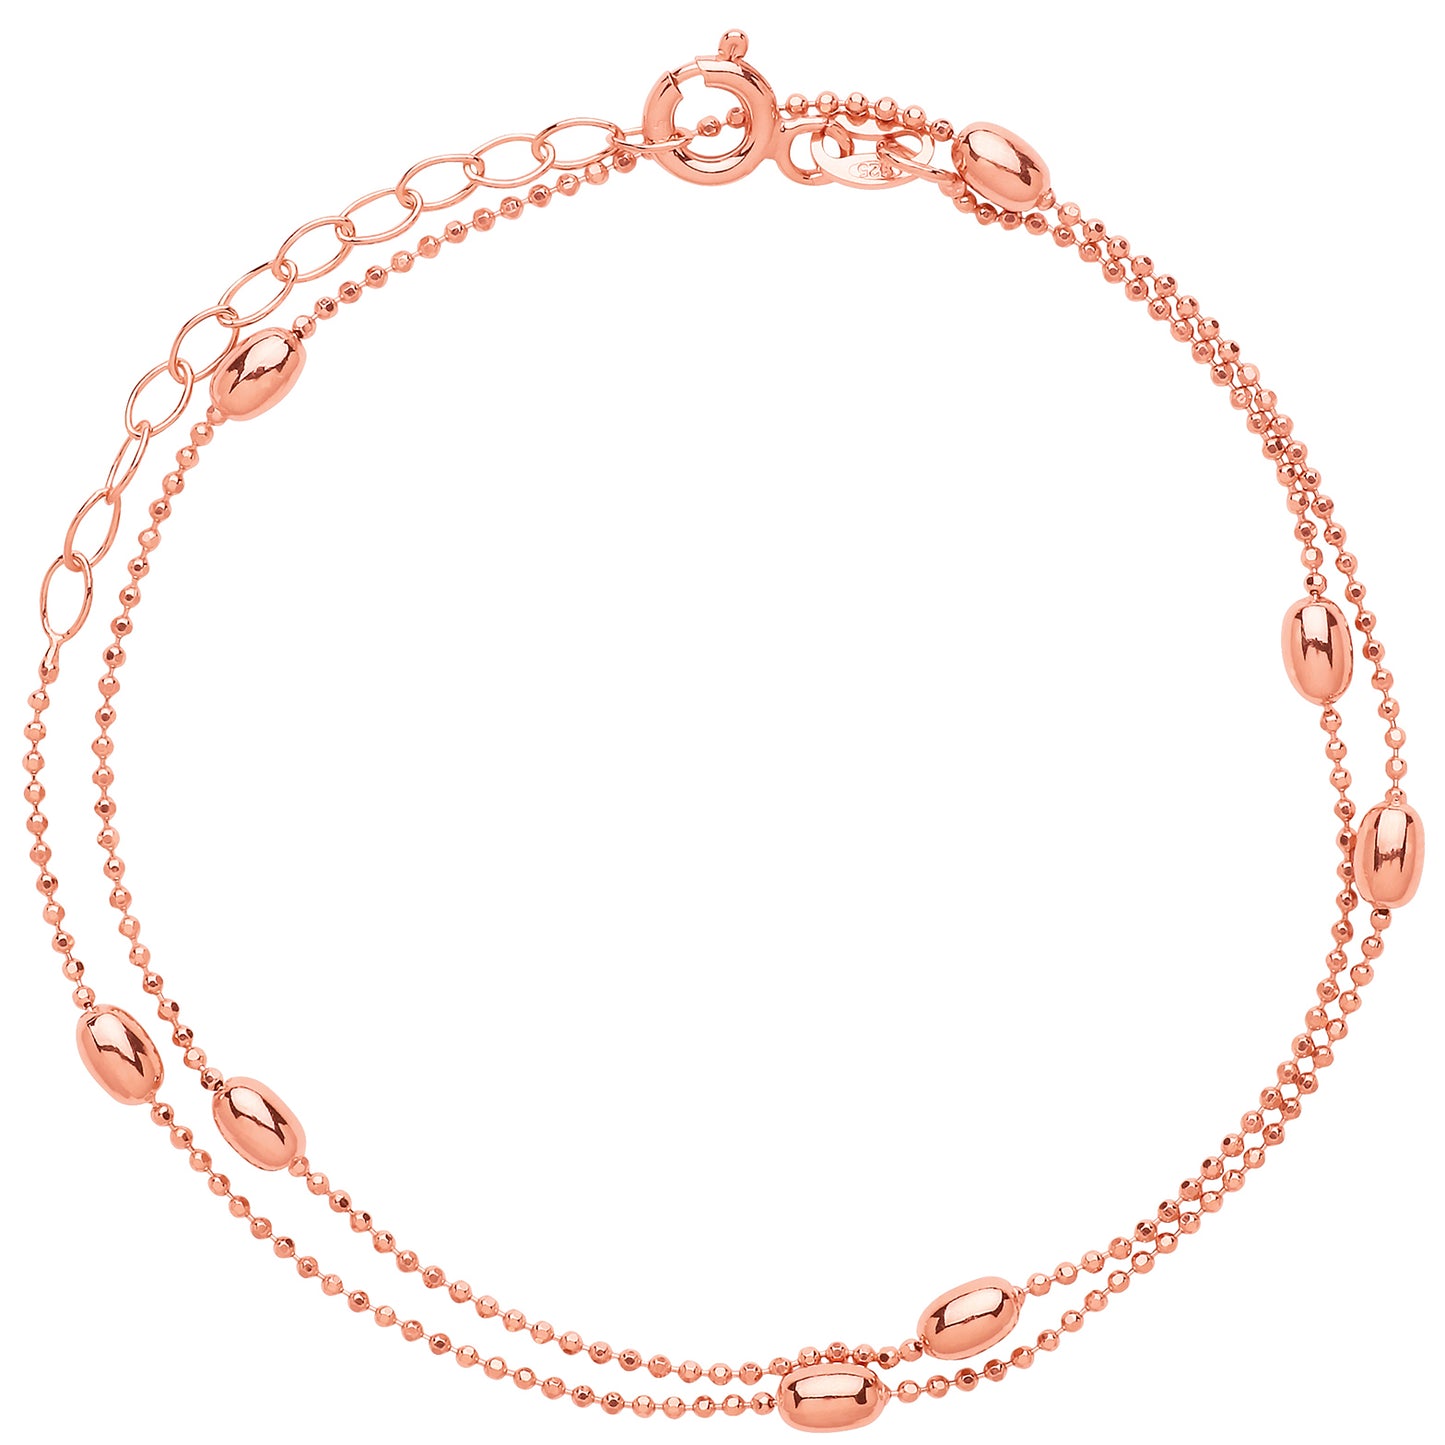 Rose Silver  3mm Oval Bead Choker Collarette Necklace 1mm 13-14" - GVCL002R